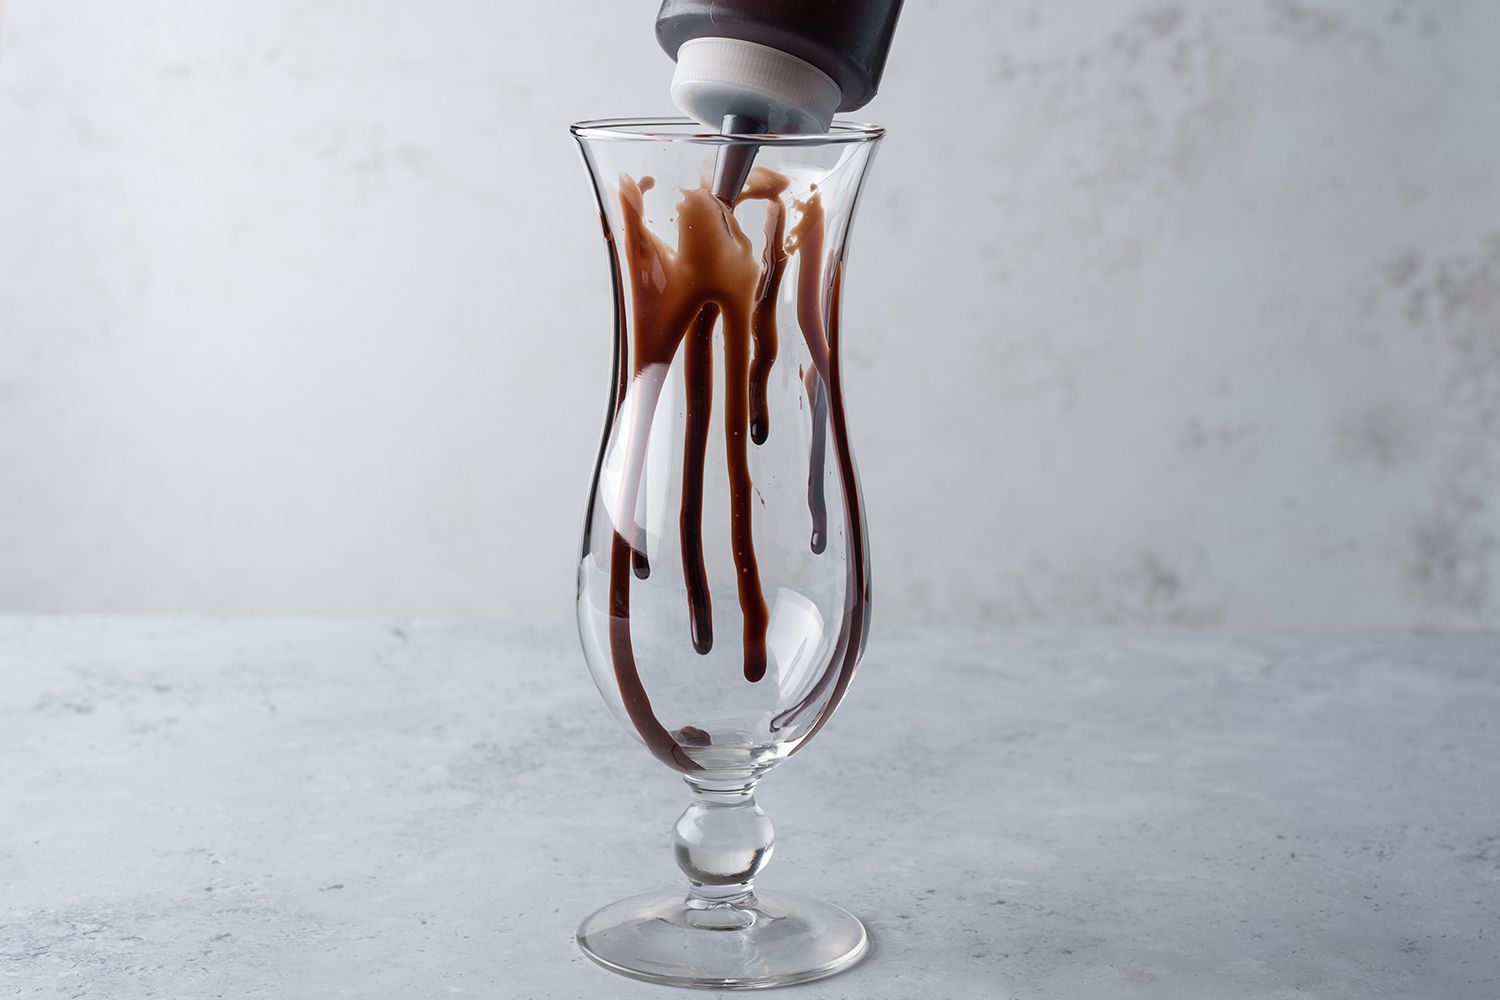 Drizzle chocolate syrup inside a hurricane glass